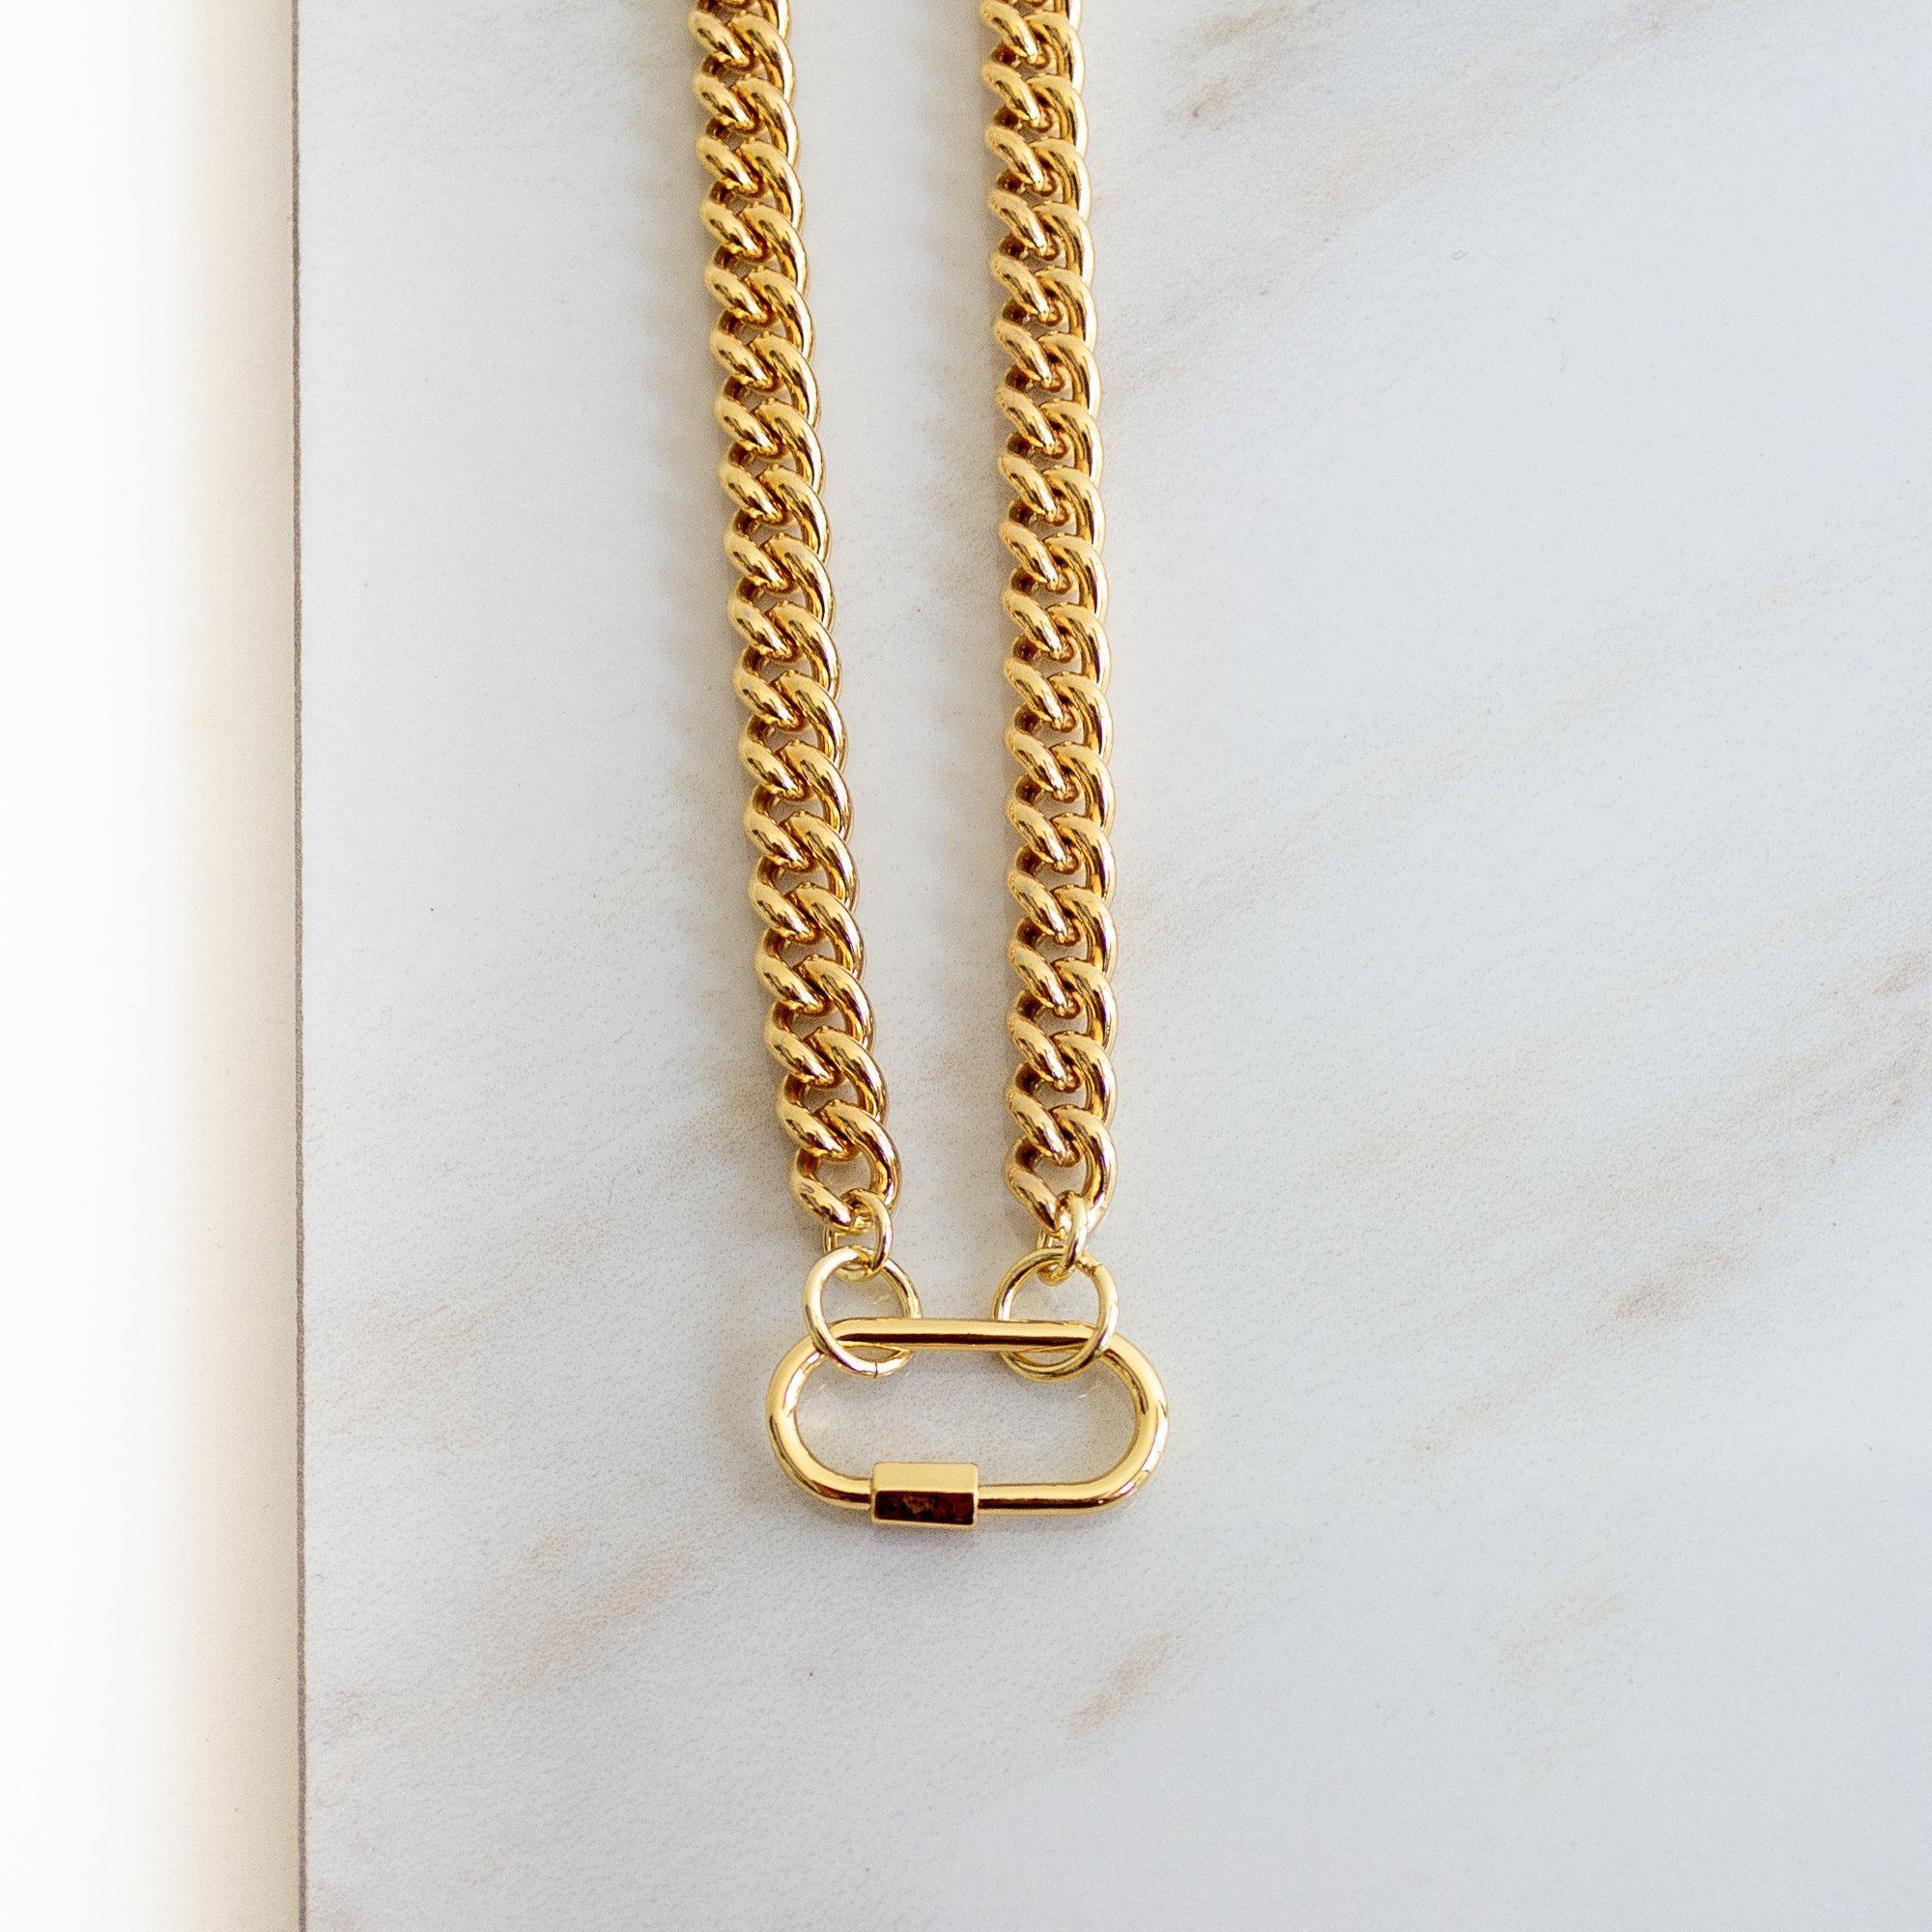 Shiny Gold Carabiner Necklace-Chunky Gold Cable Chain-Heart Pendant 20